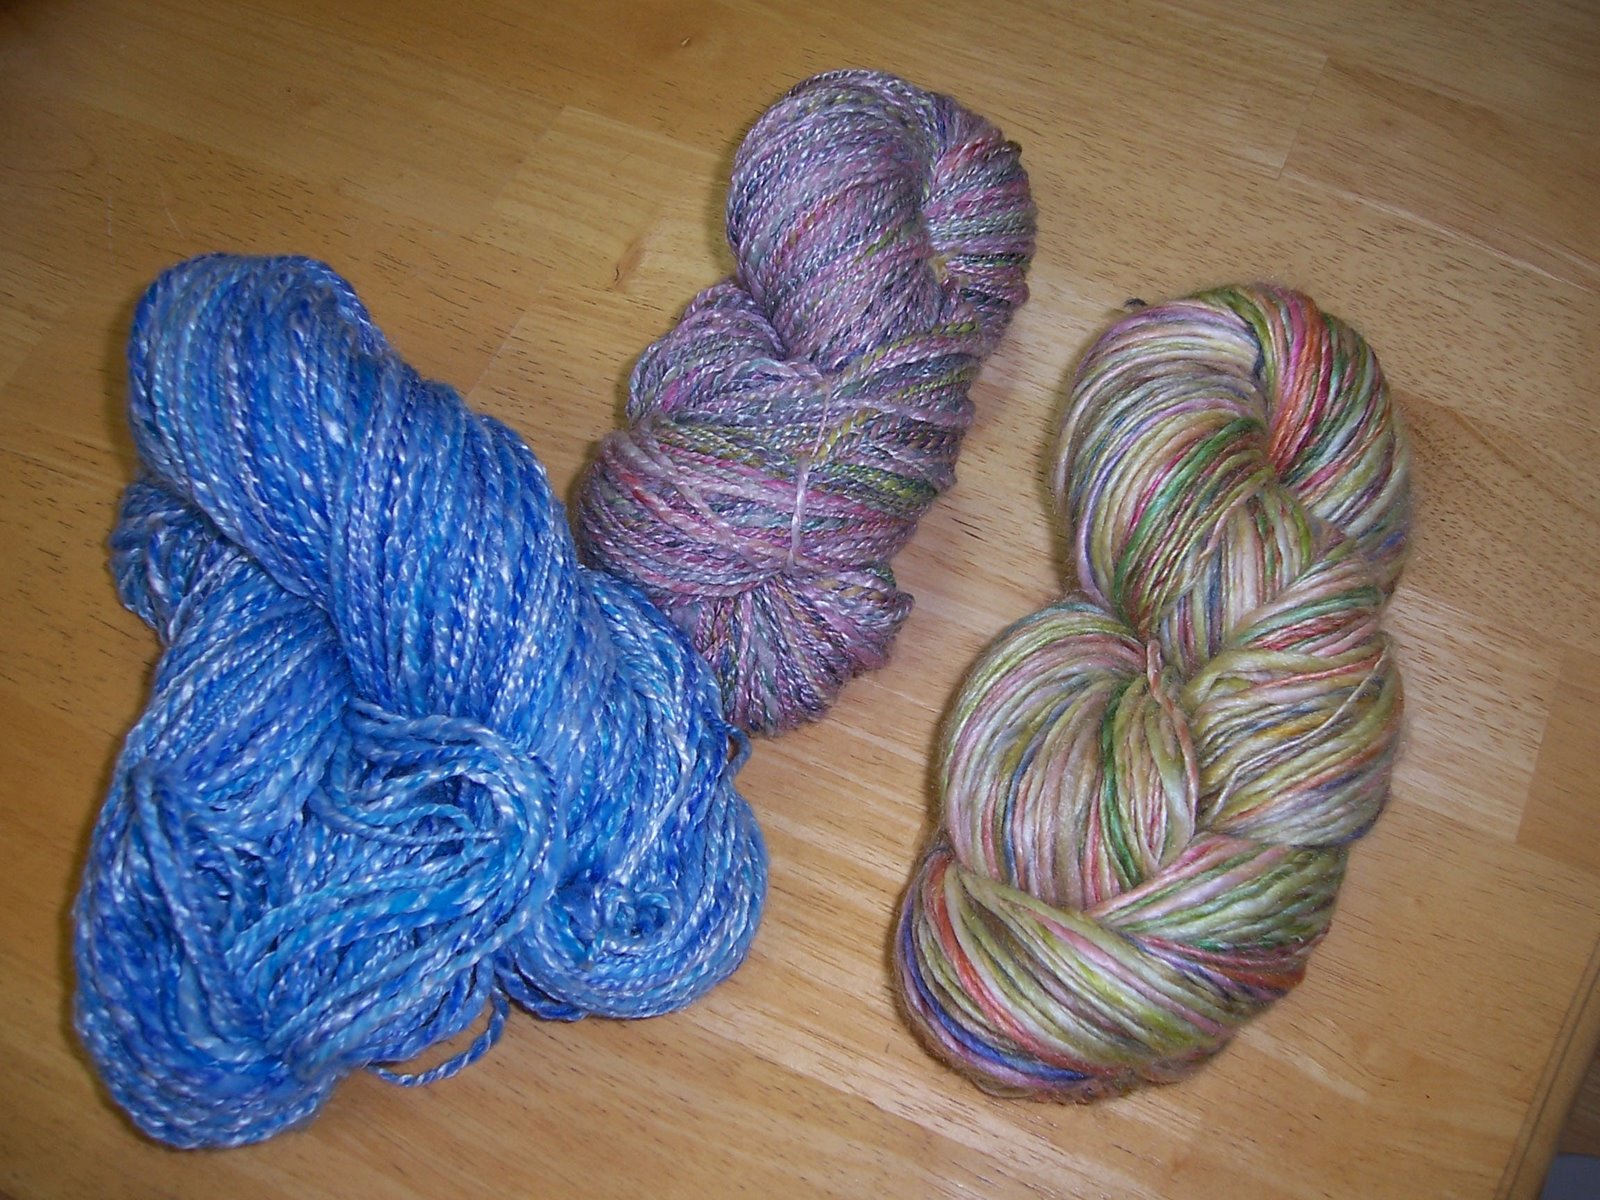 [Lisa's+yarn+from+Creatively+Dyed.jpg]